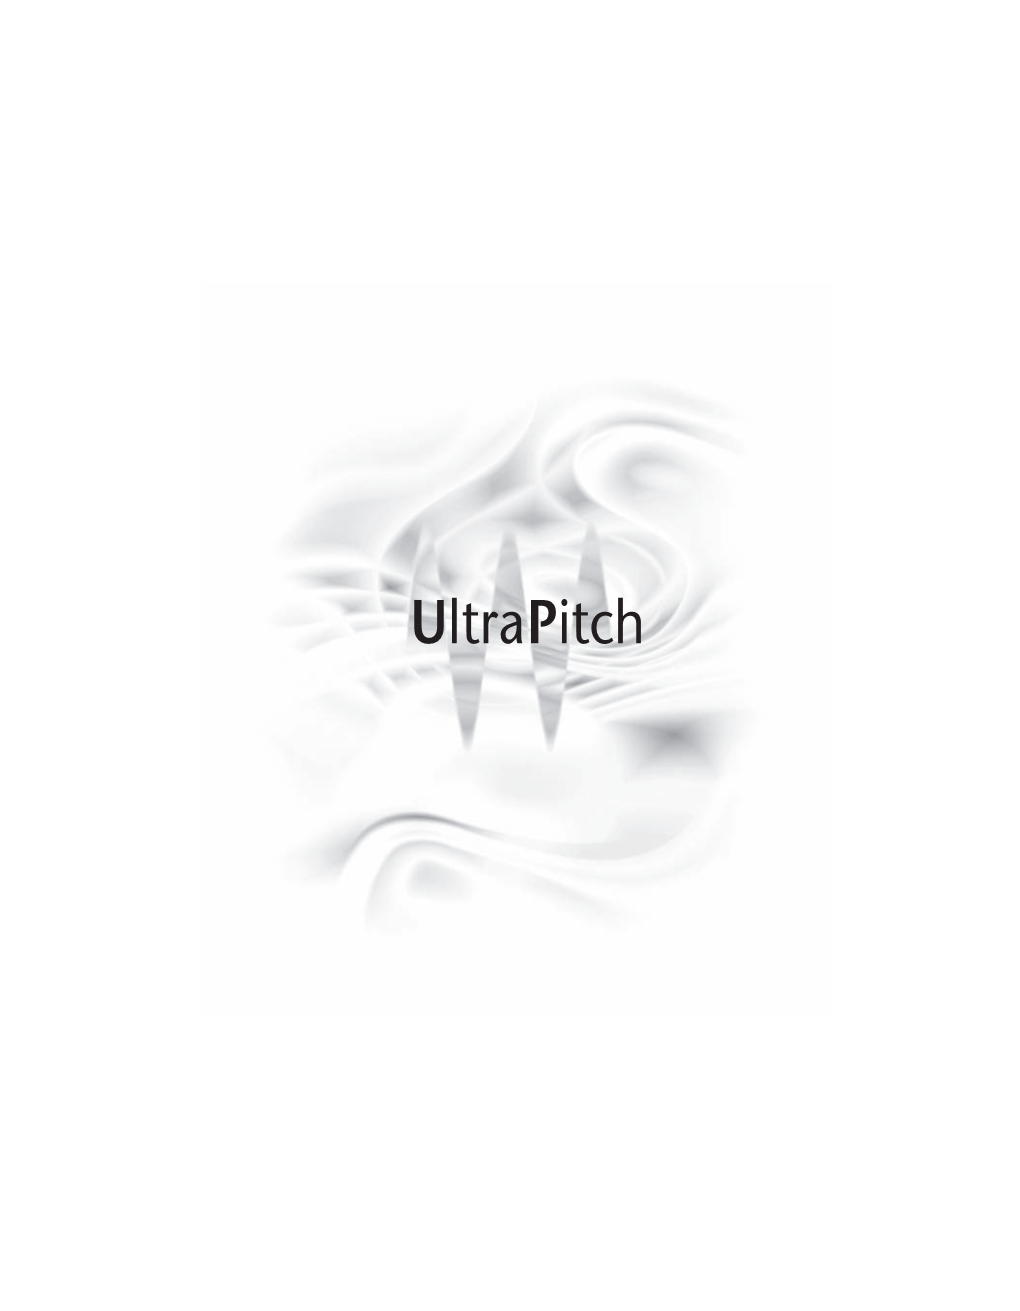 Ultrapitch Table of Contents